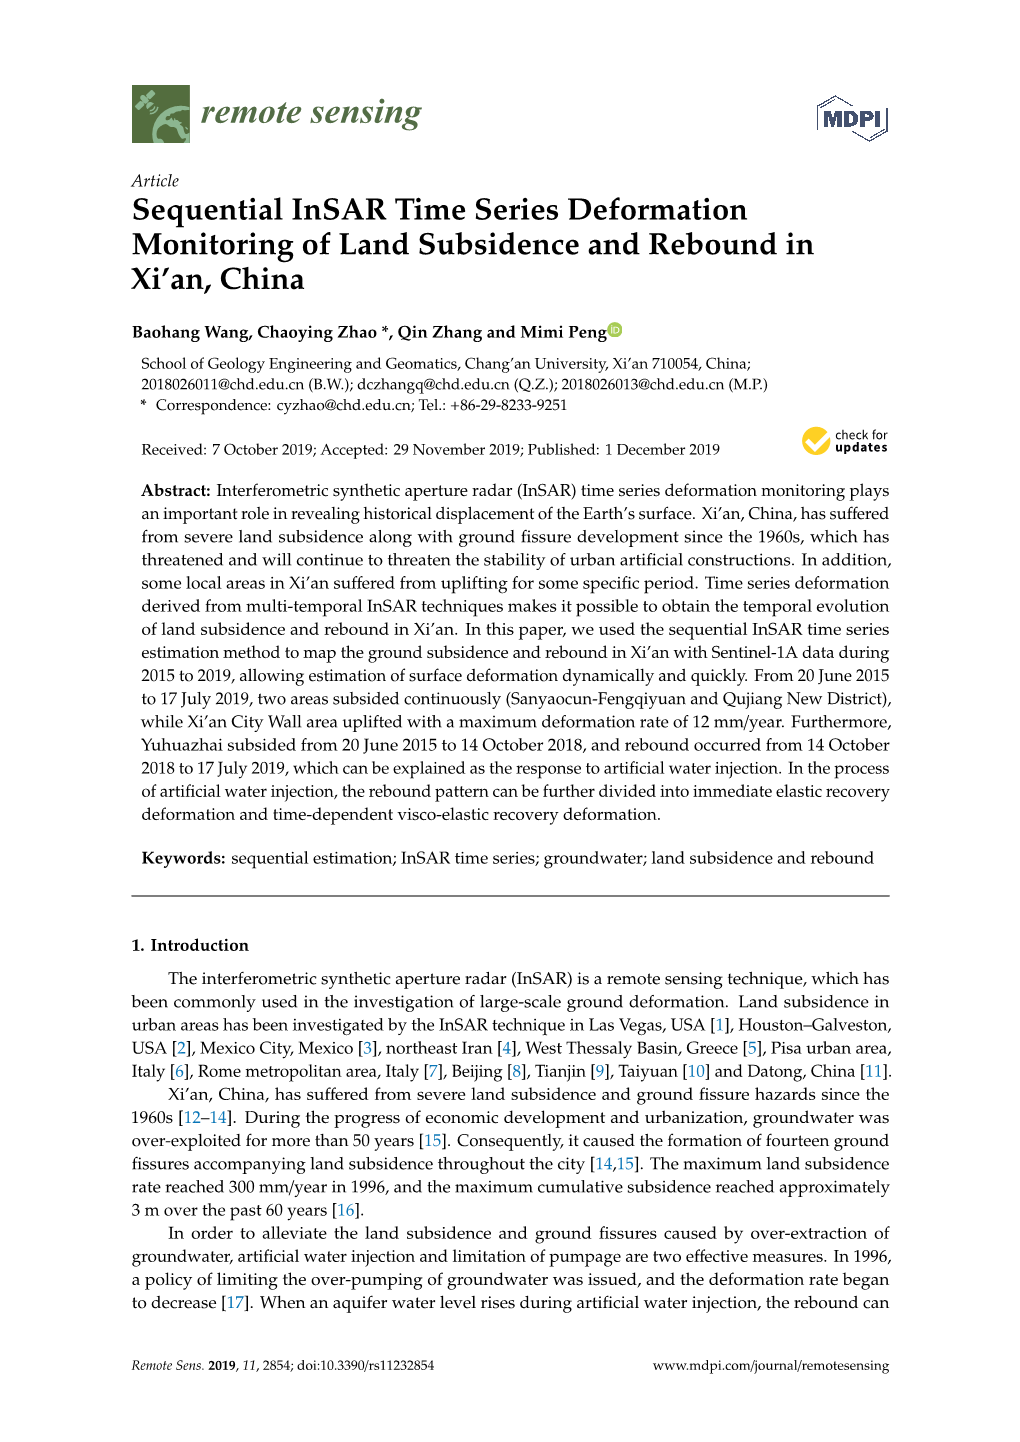 Sequential Insar Time Series Deformation Monitoring of Land Subsidence and Rebound in Xi'an, China